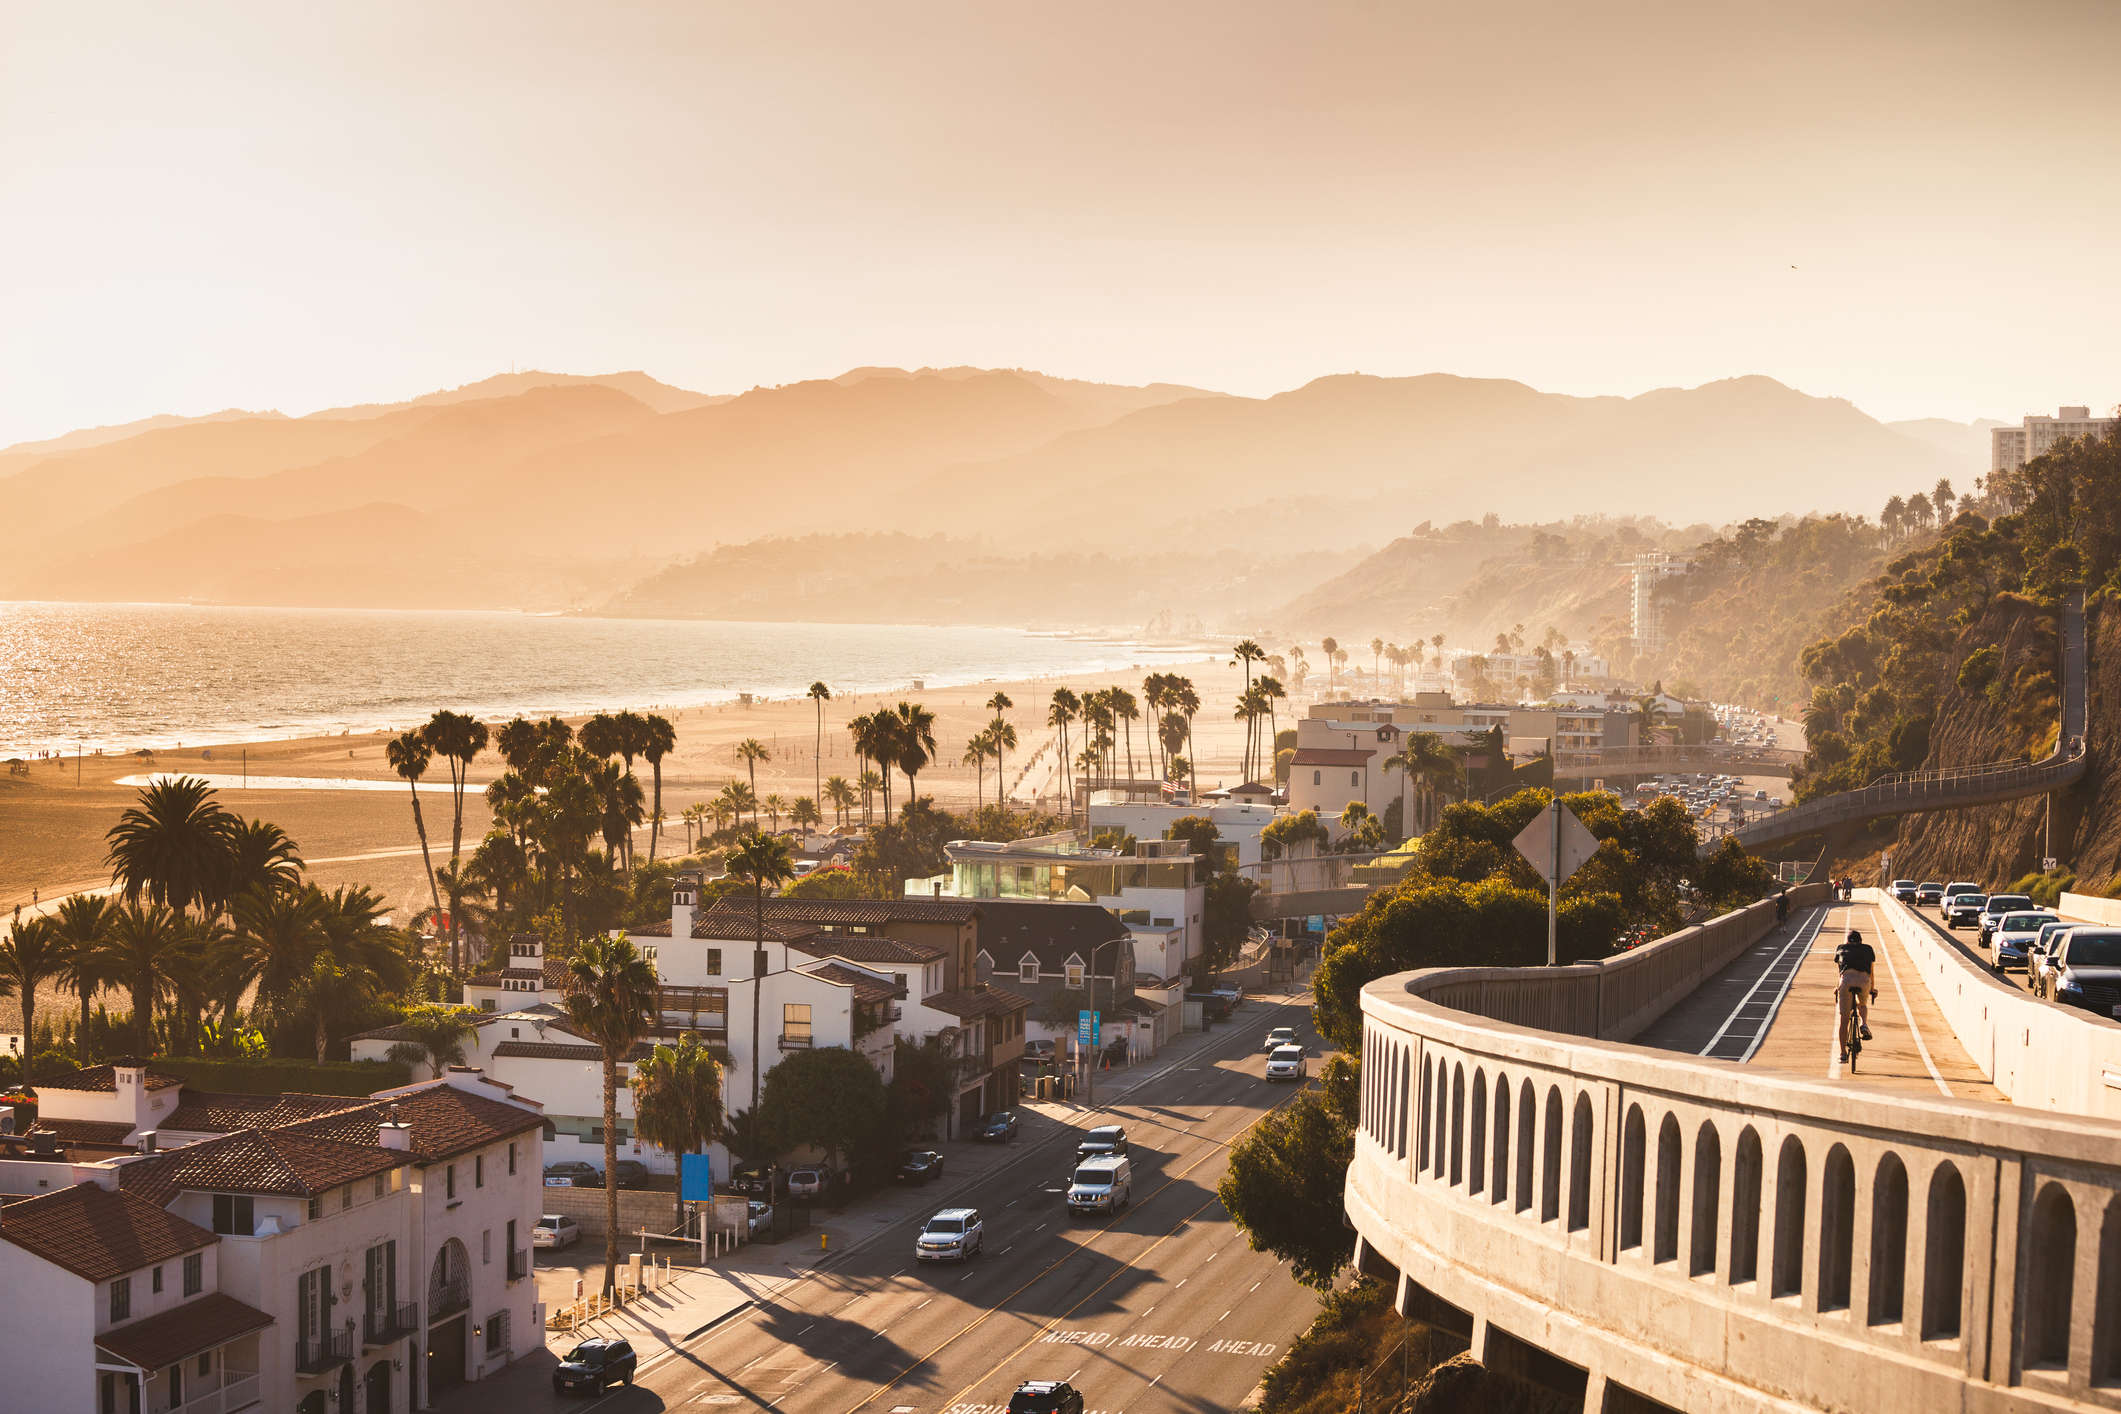 48 hours in gorgeous Santa Monica